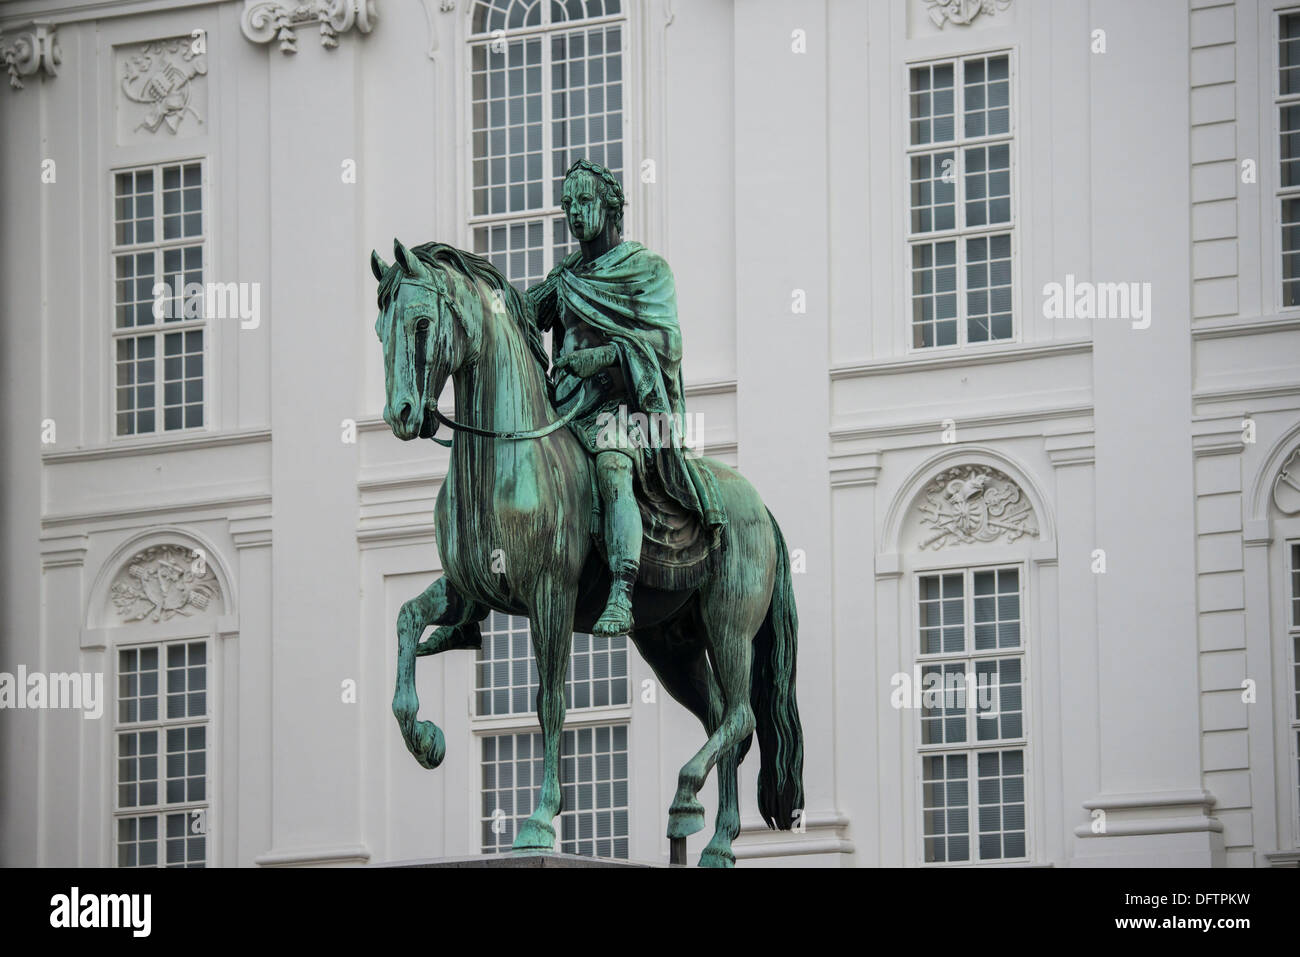 Equestrian statue in the courtyard of the Spanish Riding School, Vienna, Vienna State, Austria Stock Photo